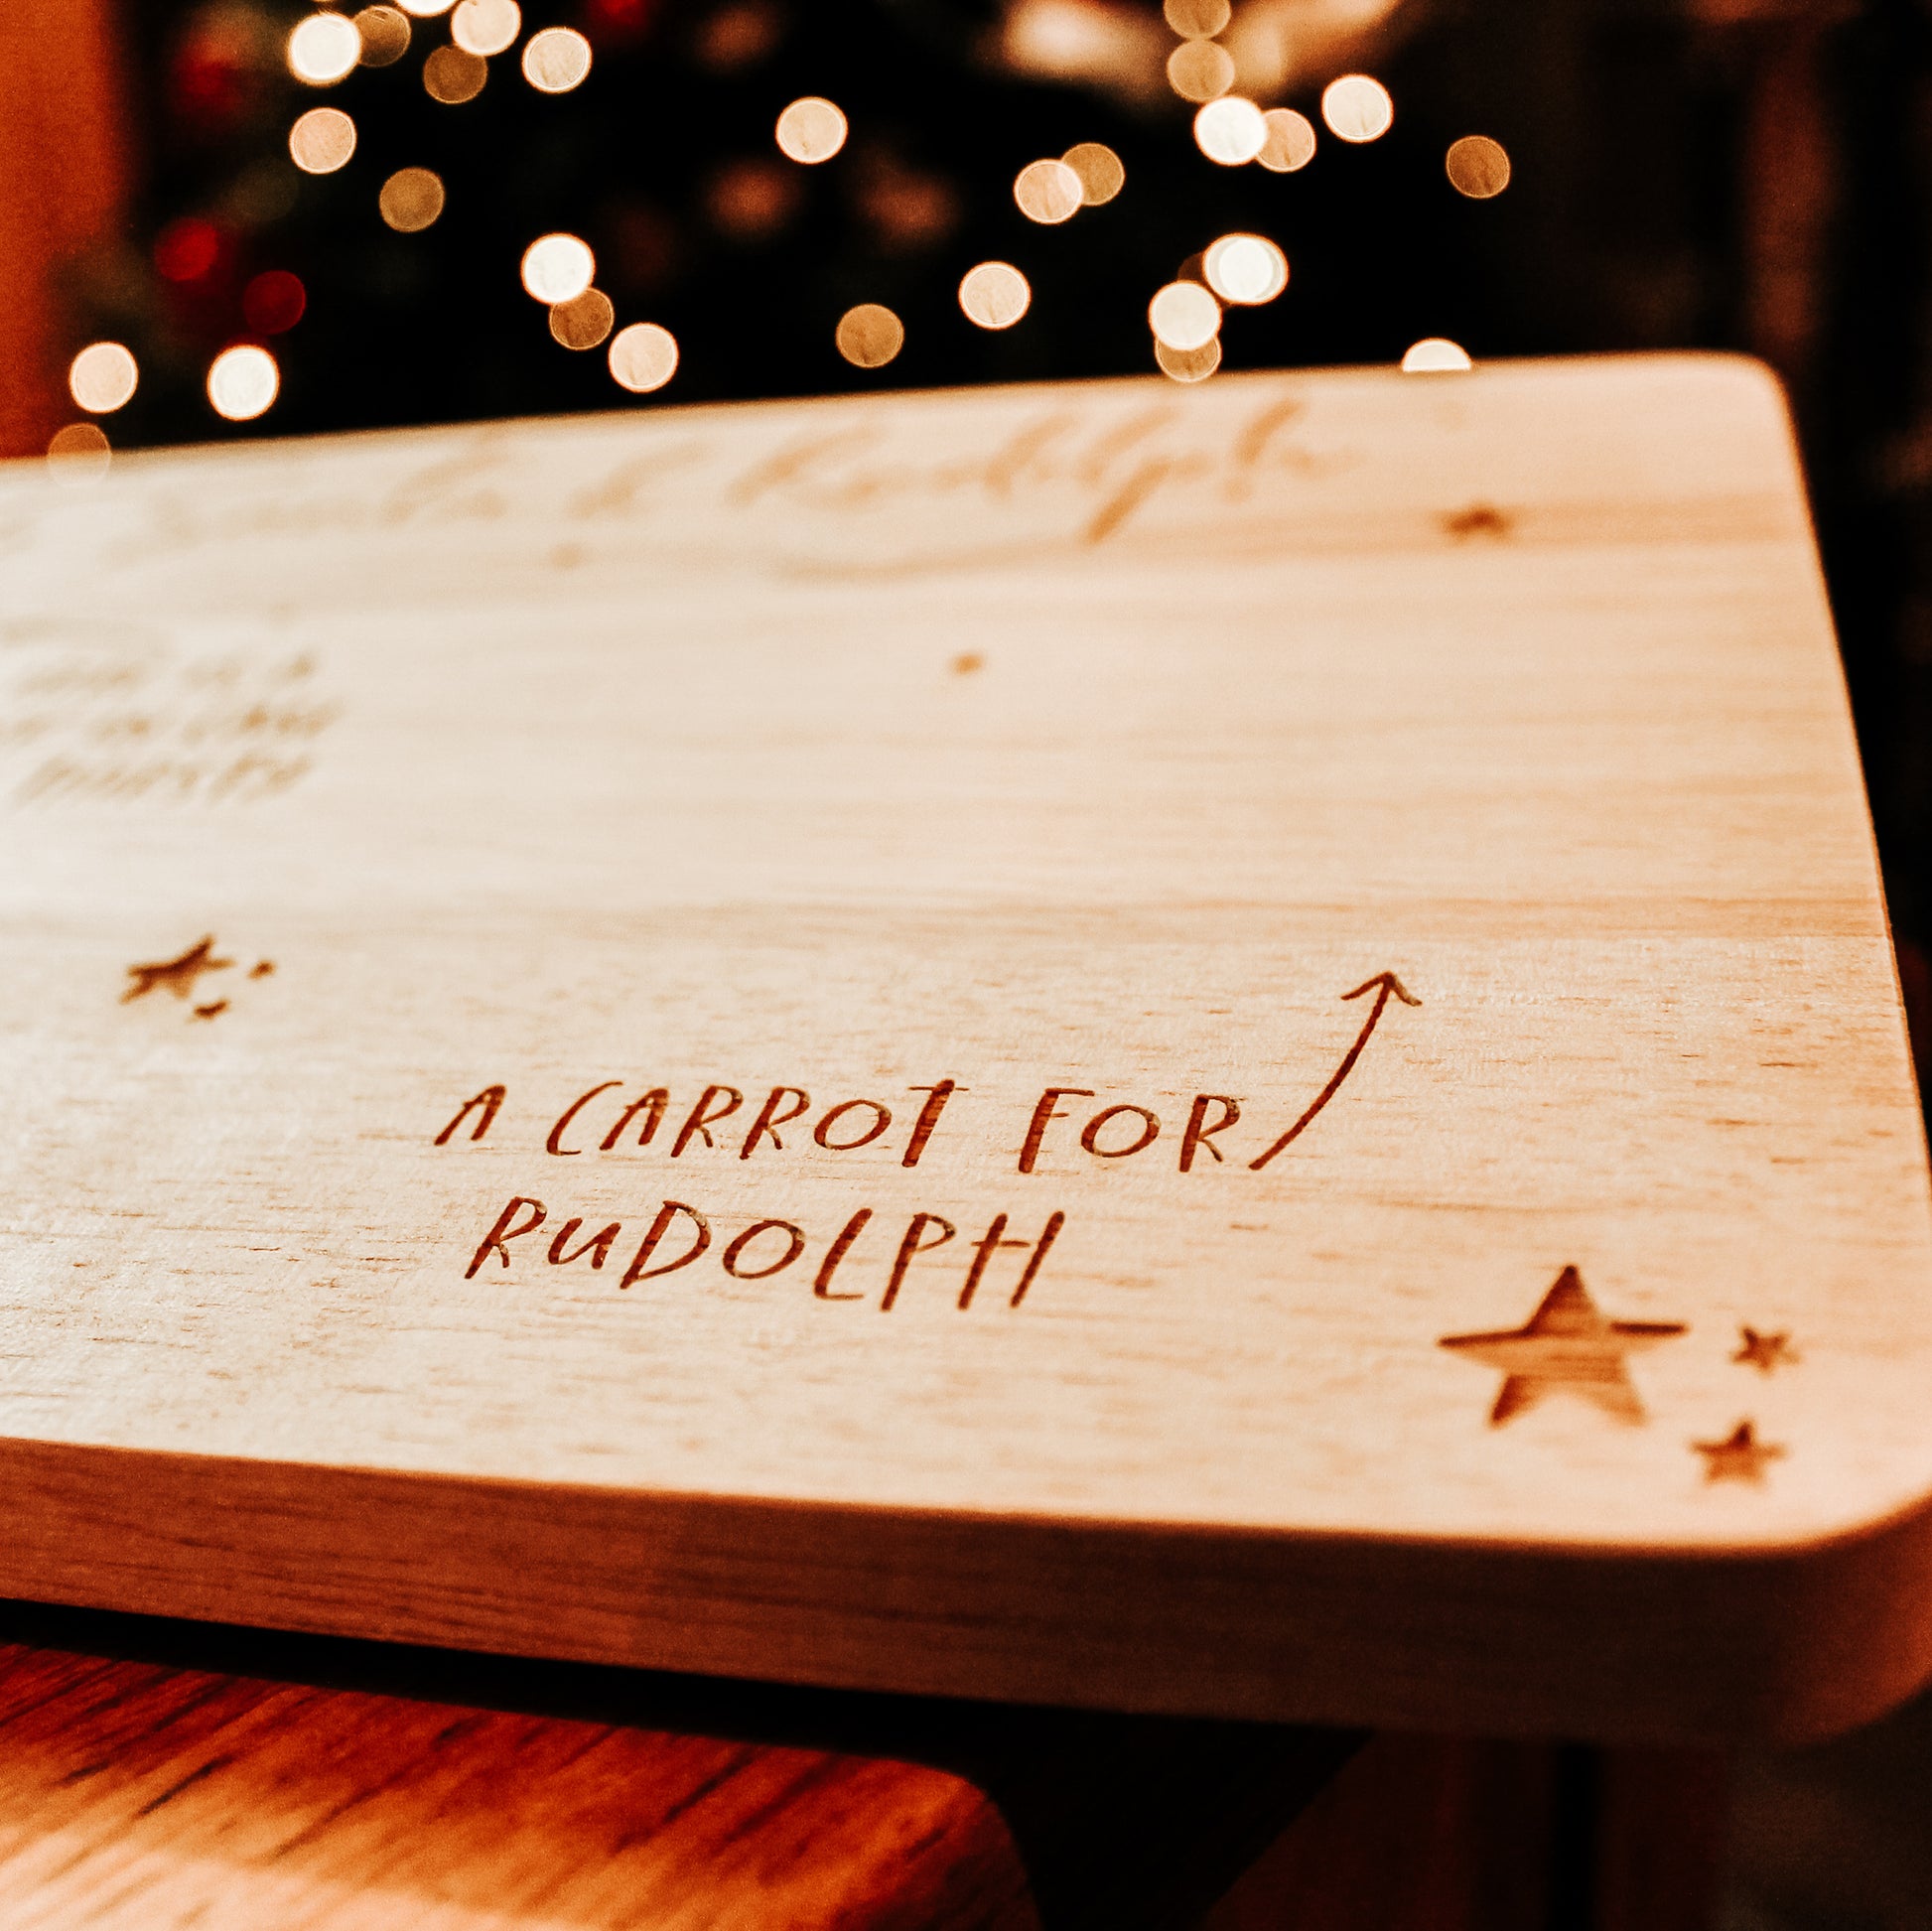 wooden christmas eve plate for santa and the reindeer with space for a drink, carrots for the reindeer and a tasty treat